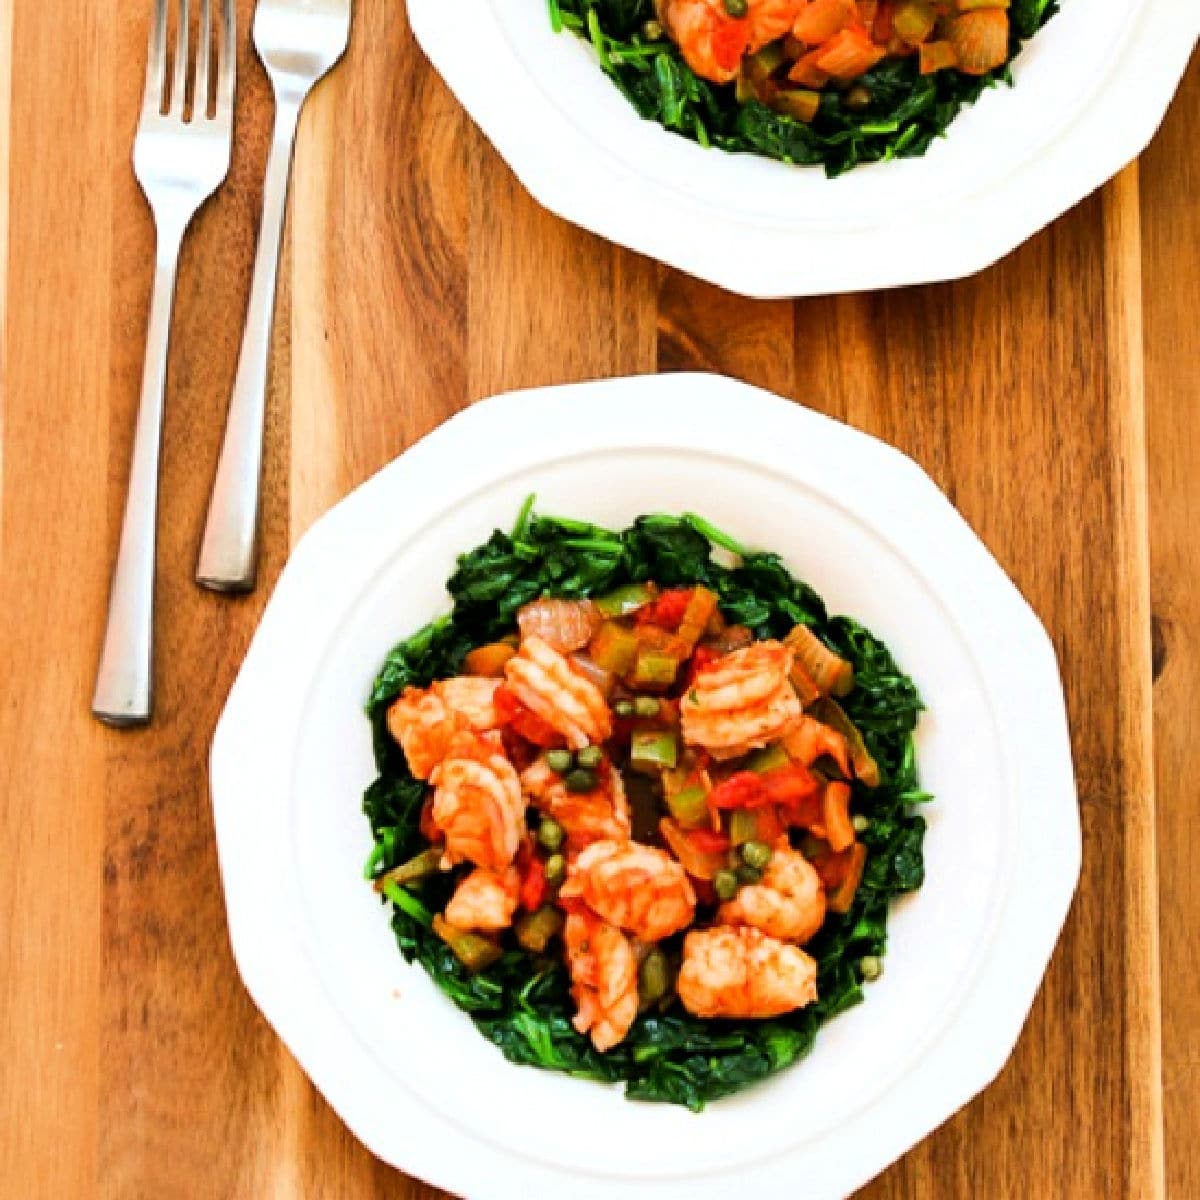 Mediterranean Shrimp with Spinach shown on serving plates with forks.